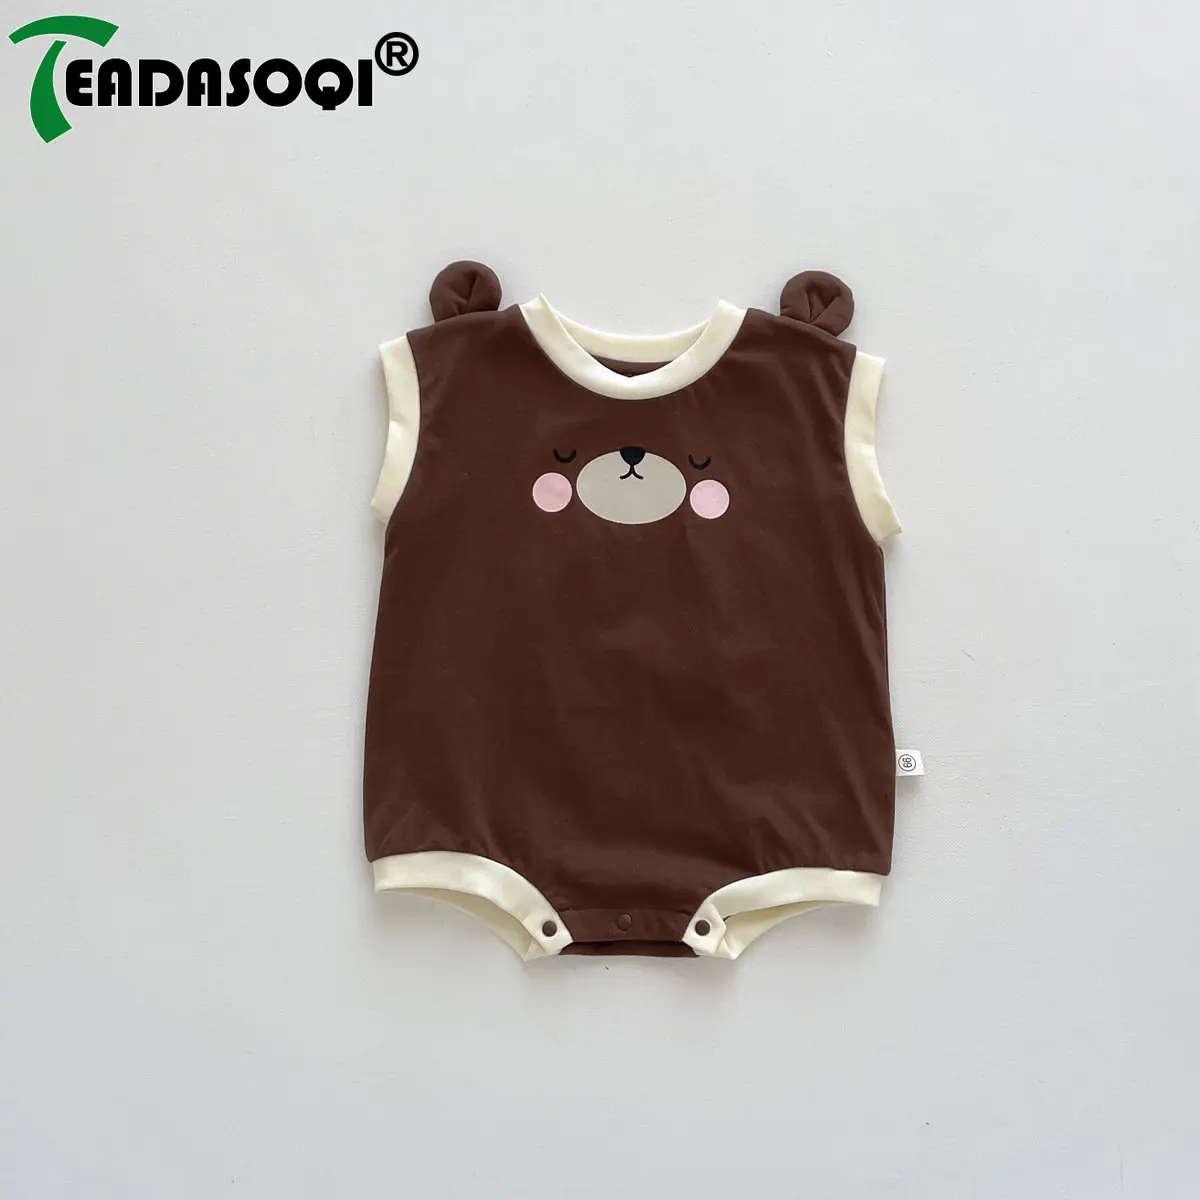 

Perfect for Summer Infant Kids Outdoor Playtime! Stay Cool Cute In Our Newborn Baby Boys Sleeveless Cartoon Bear Bodysuits